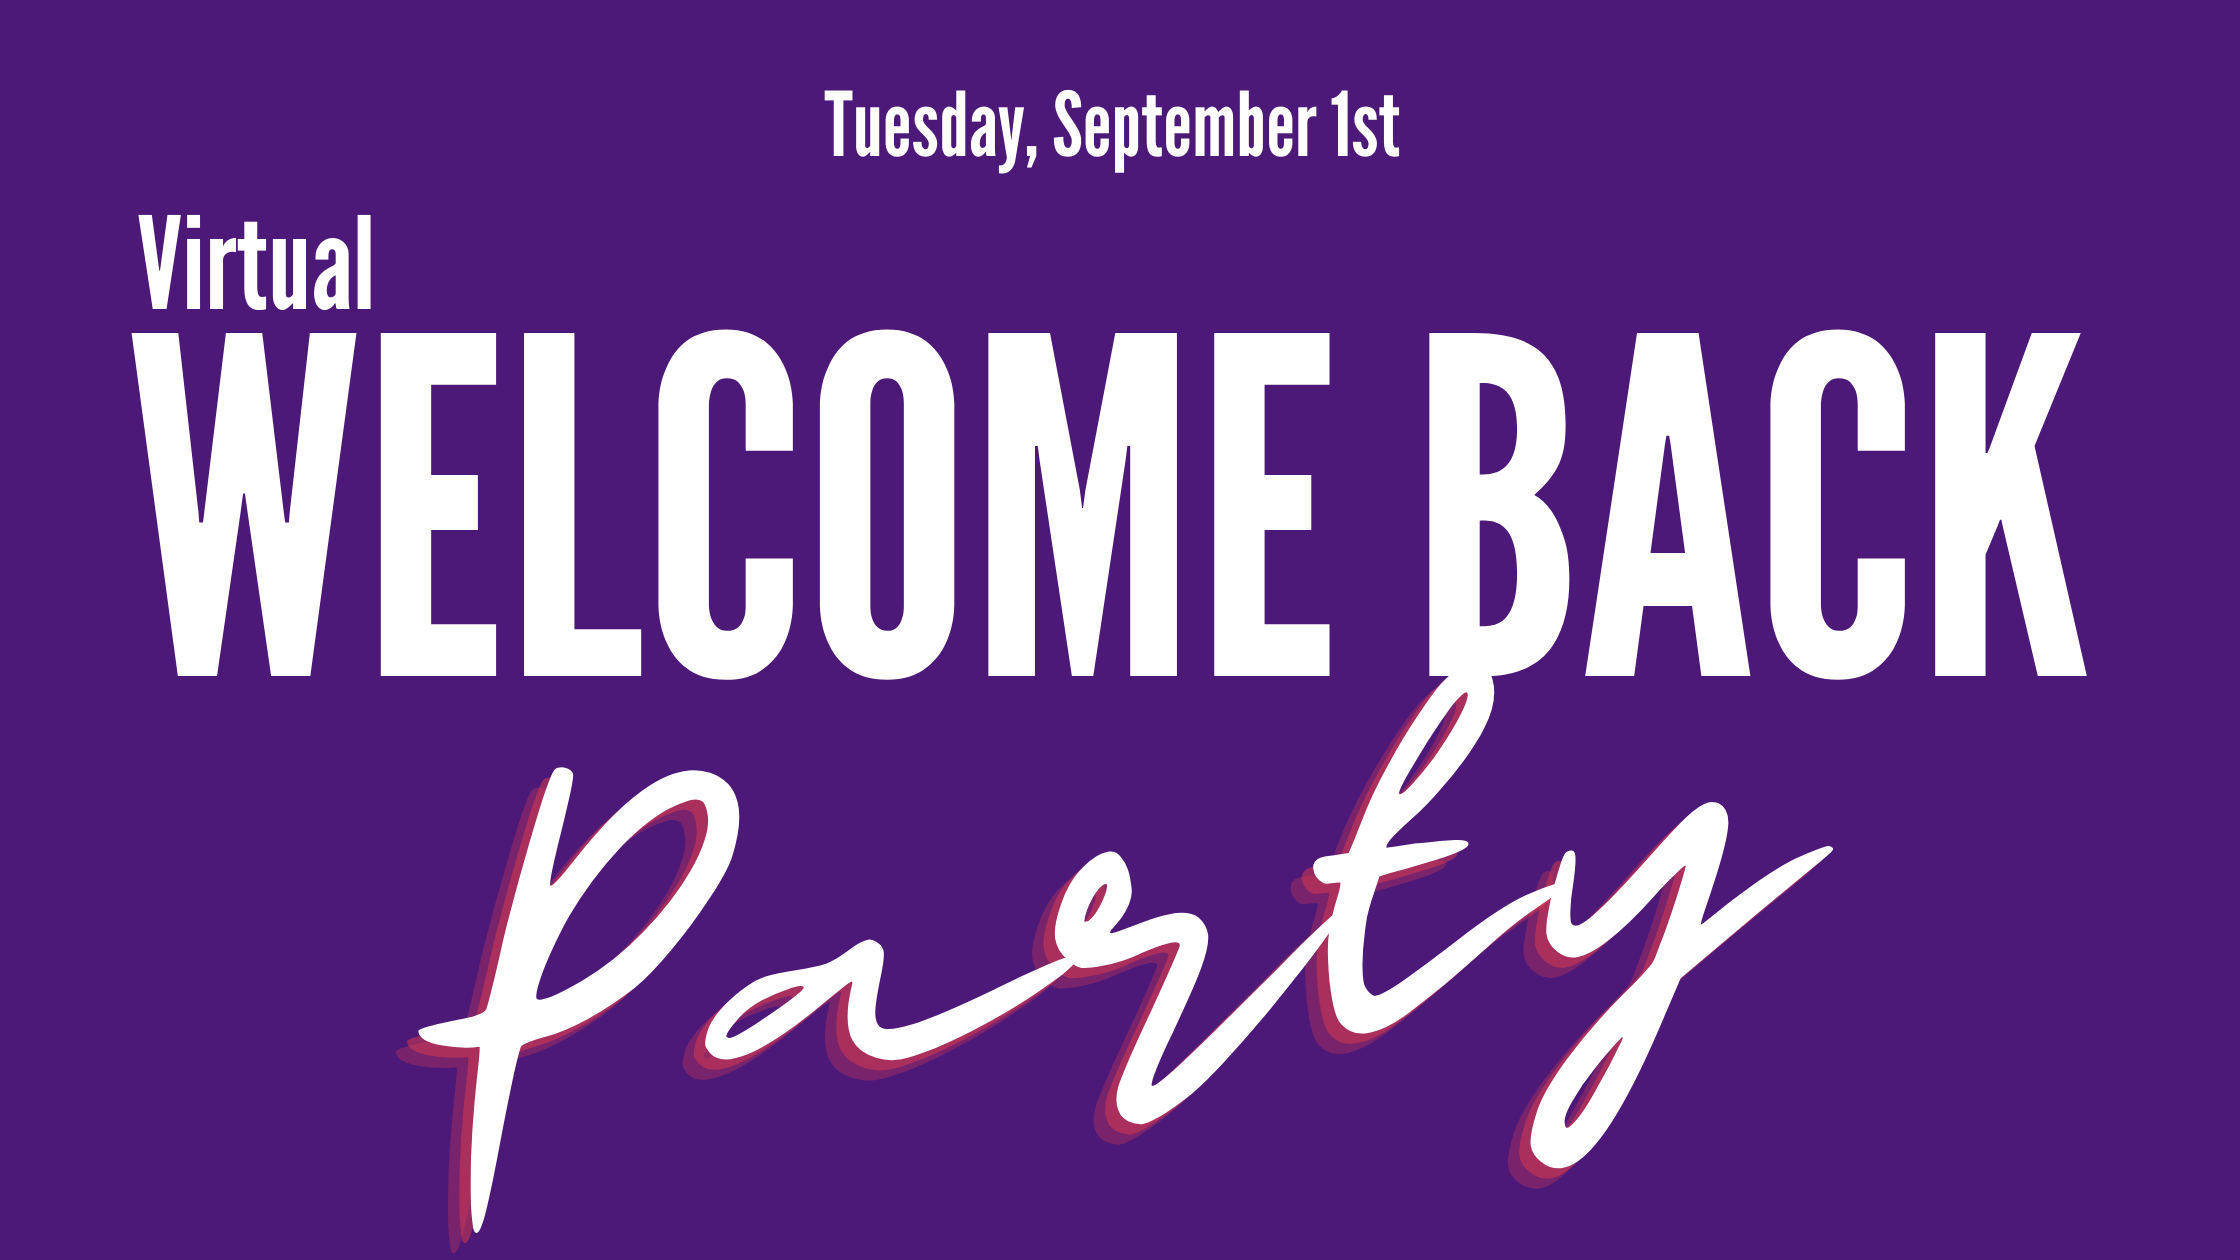 A flyer for the welcome back party